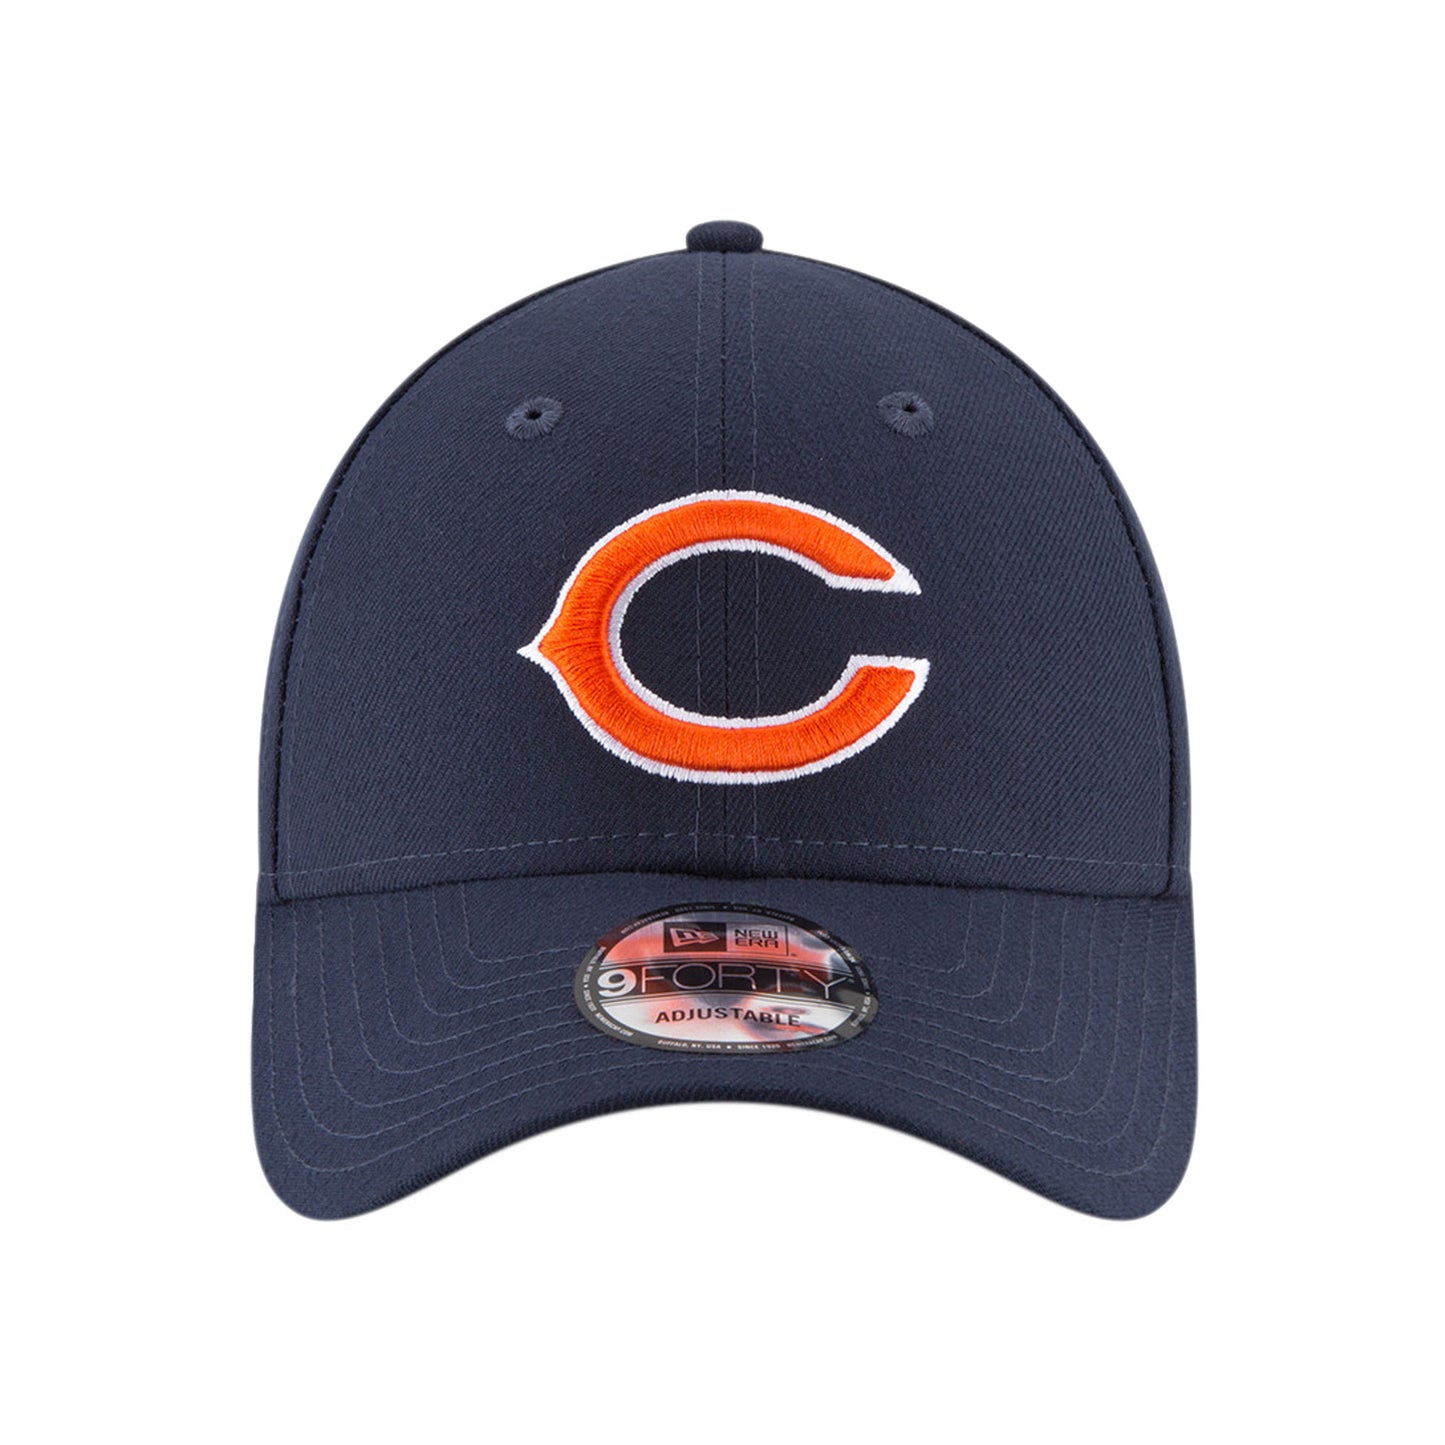 THE LEAGUE Chicago Bears 9FORTY New Era Cap